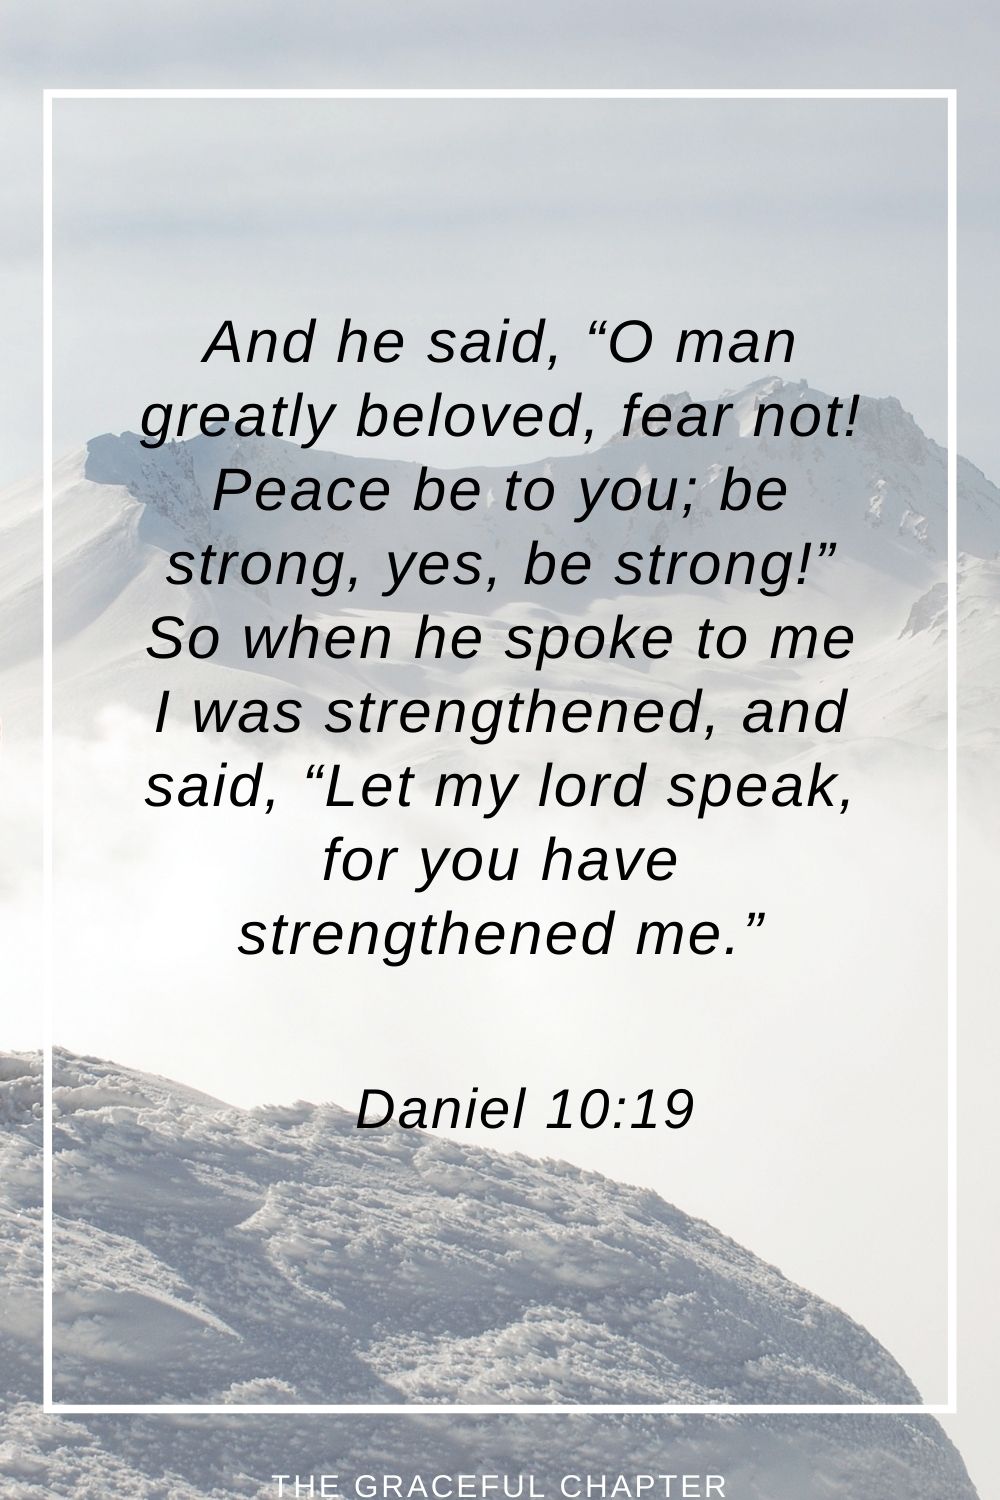 And he said, “O man greatly beloved, fear not! Peace be to you; be strong, yes, be strong!” So when he spoke to me I was strengthened, and said, “Let my lord speak, for you have strengthened me.” Daniel 10:19